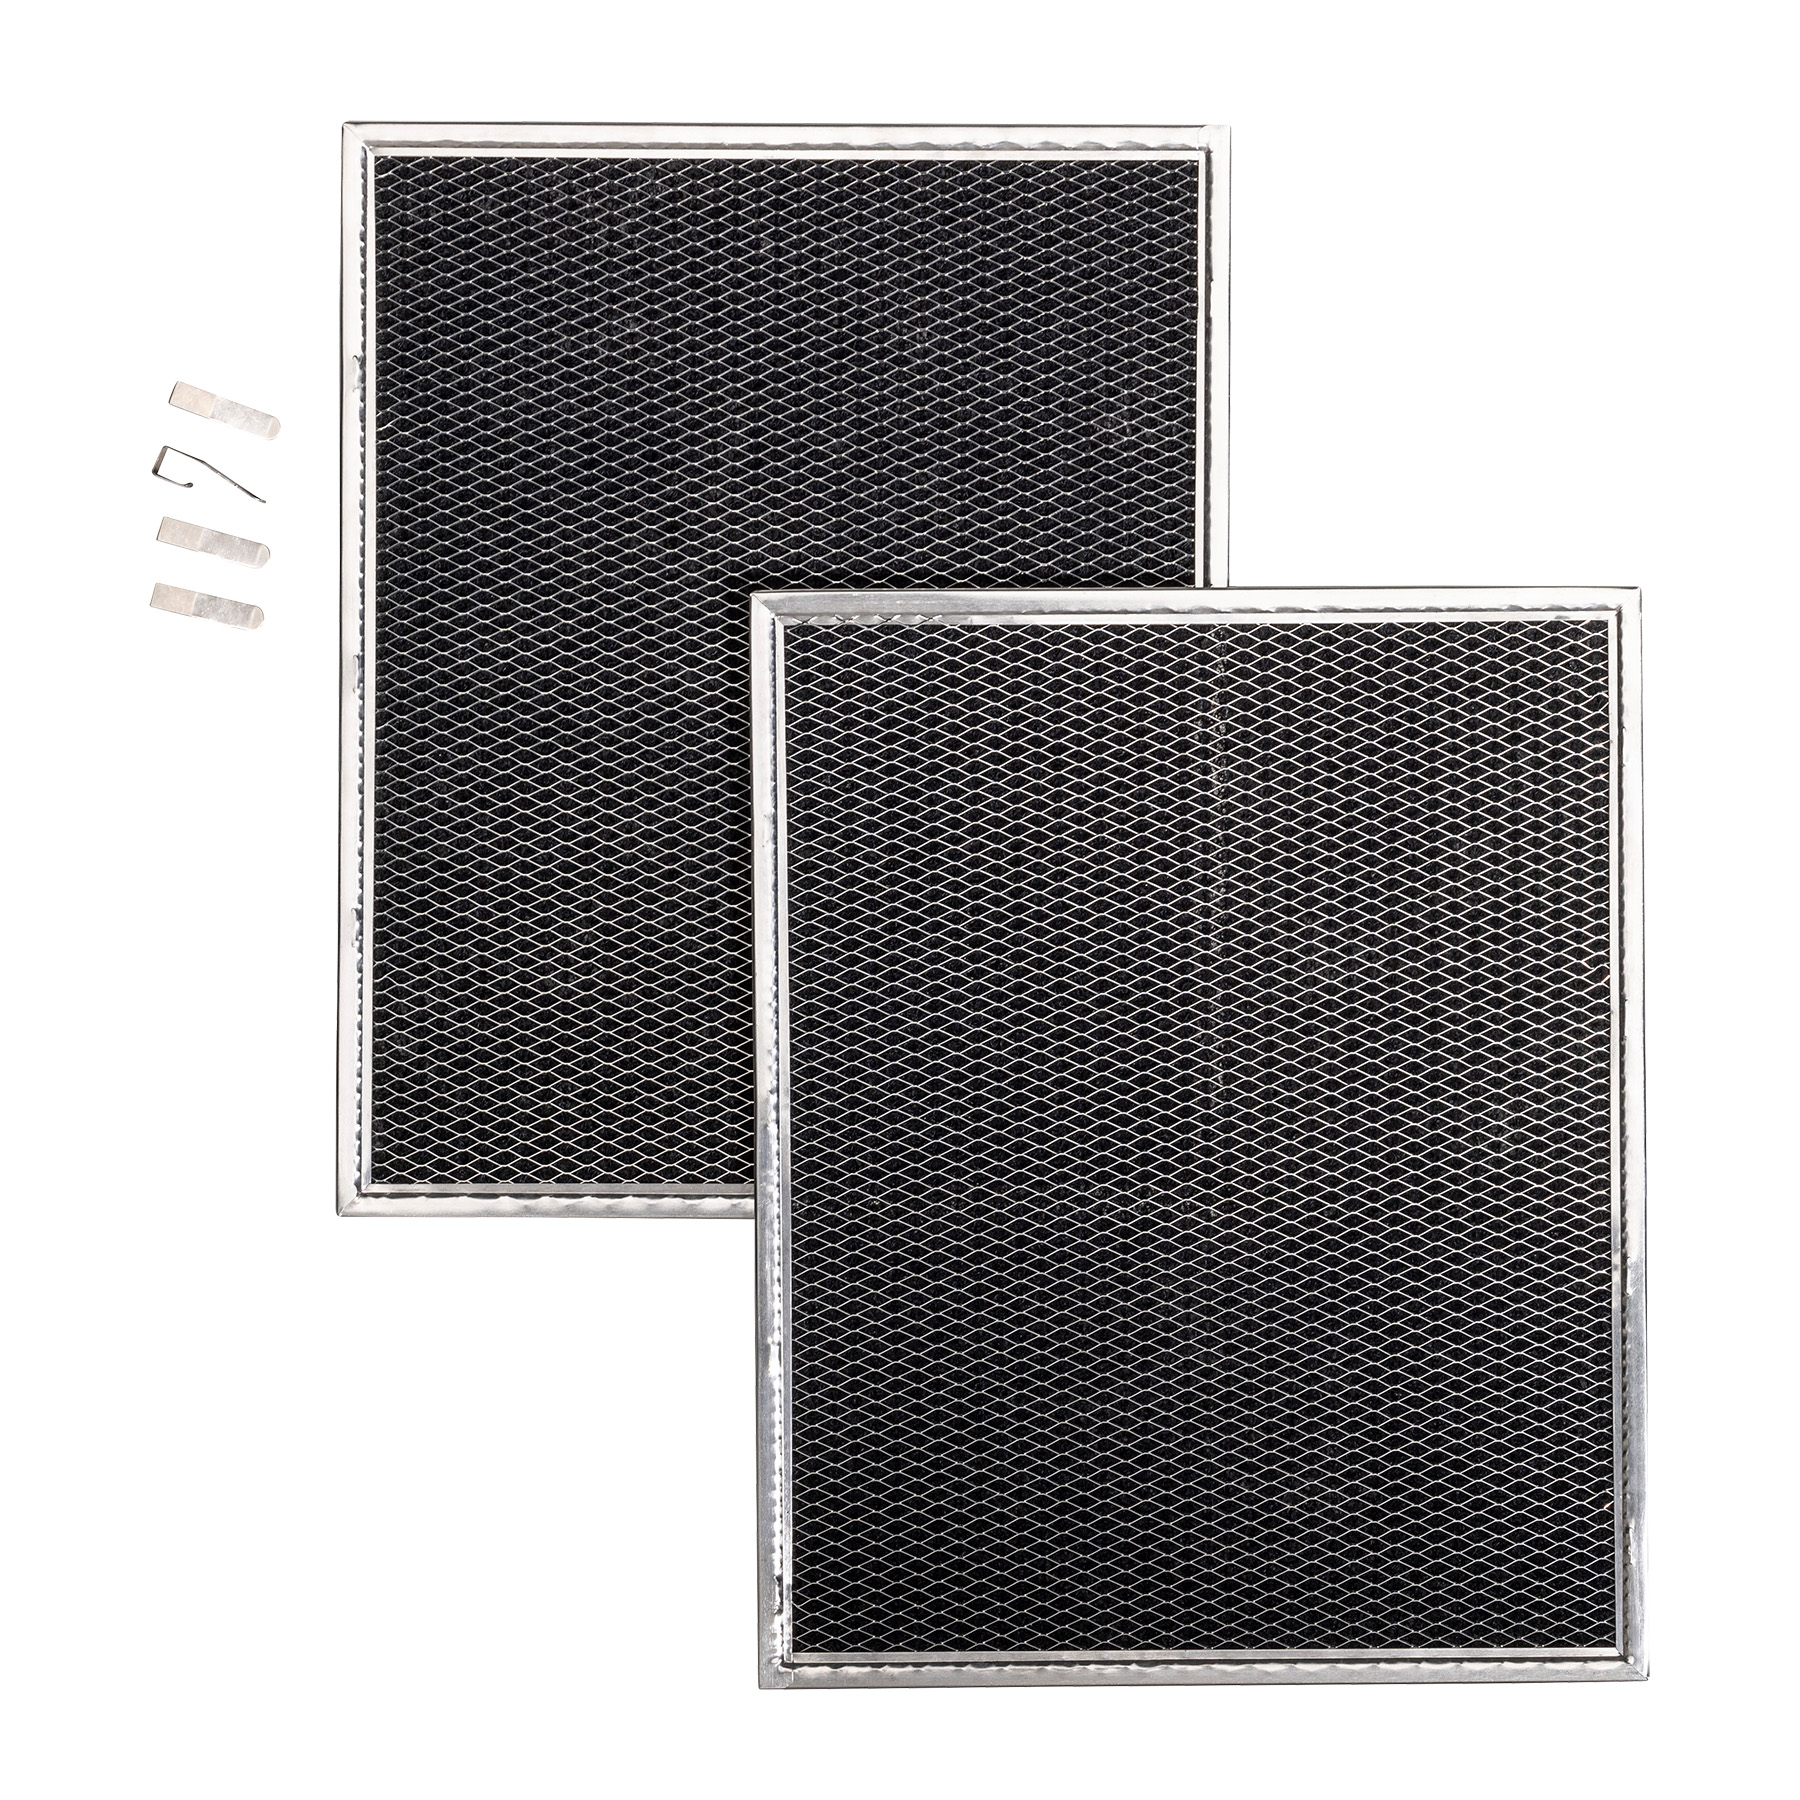 Broan-NuTone® Genuine Replacement Charcoal Filter for Range Hoods, 13-5/16" x 10-13/16", Fits Select Models, (2-Pack)